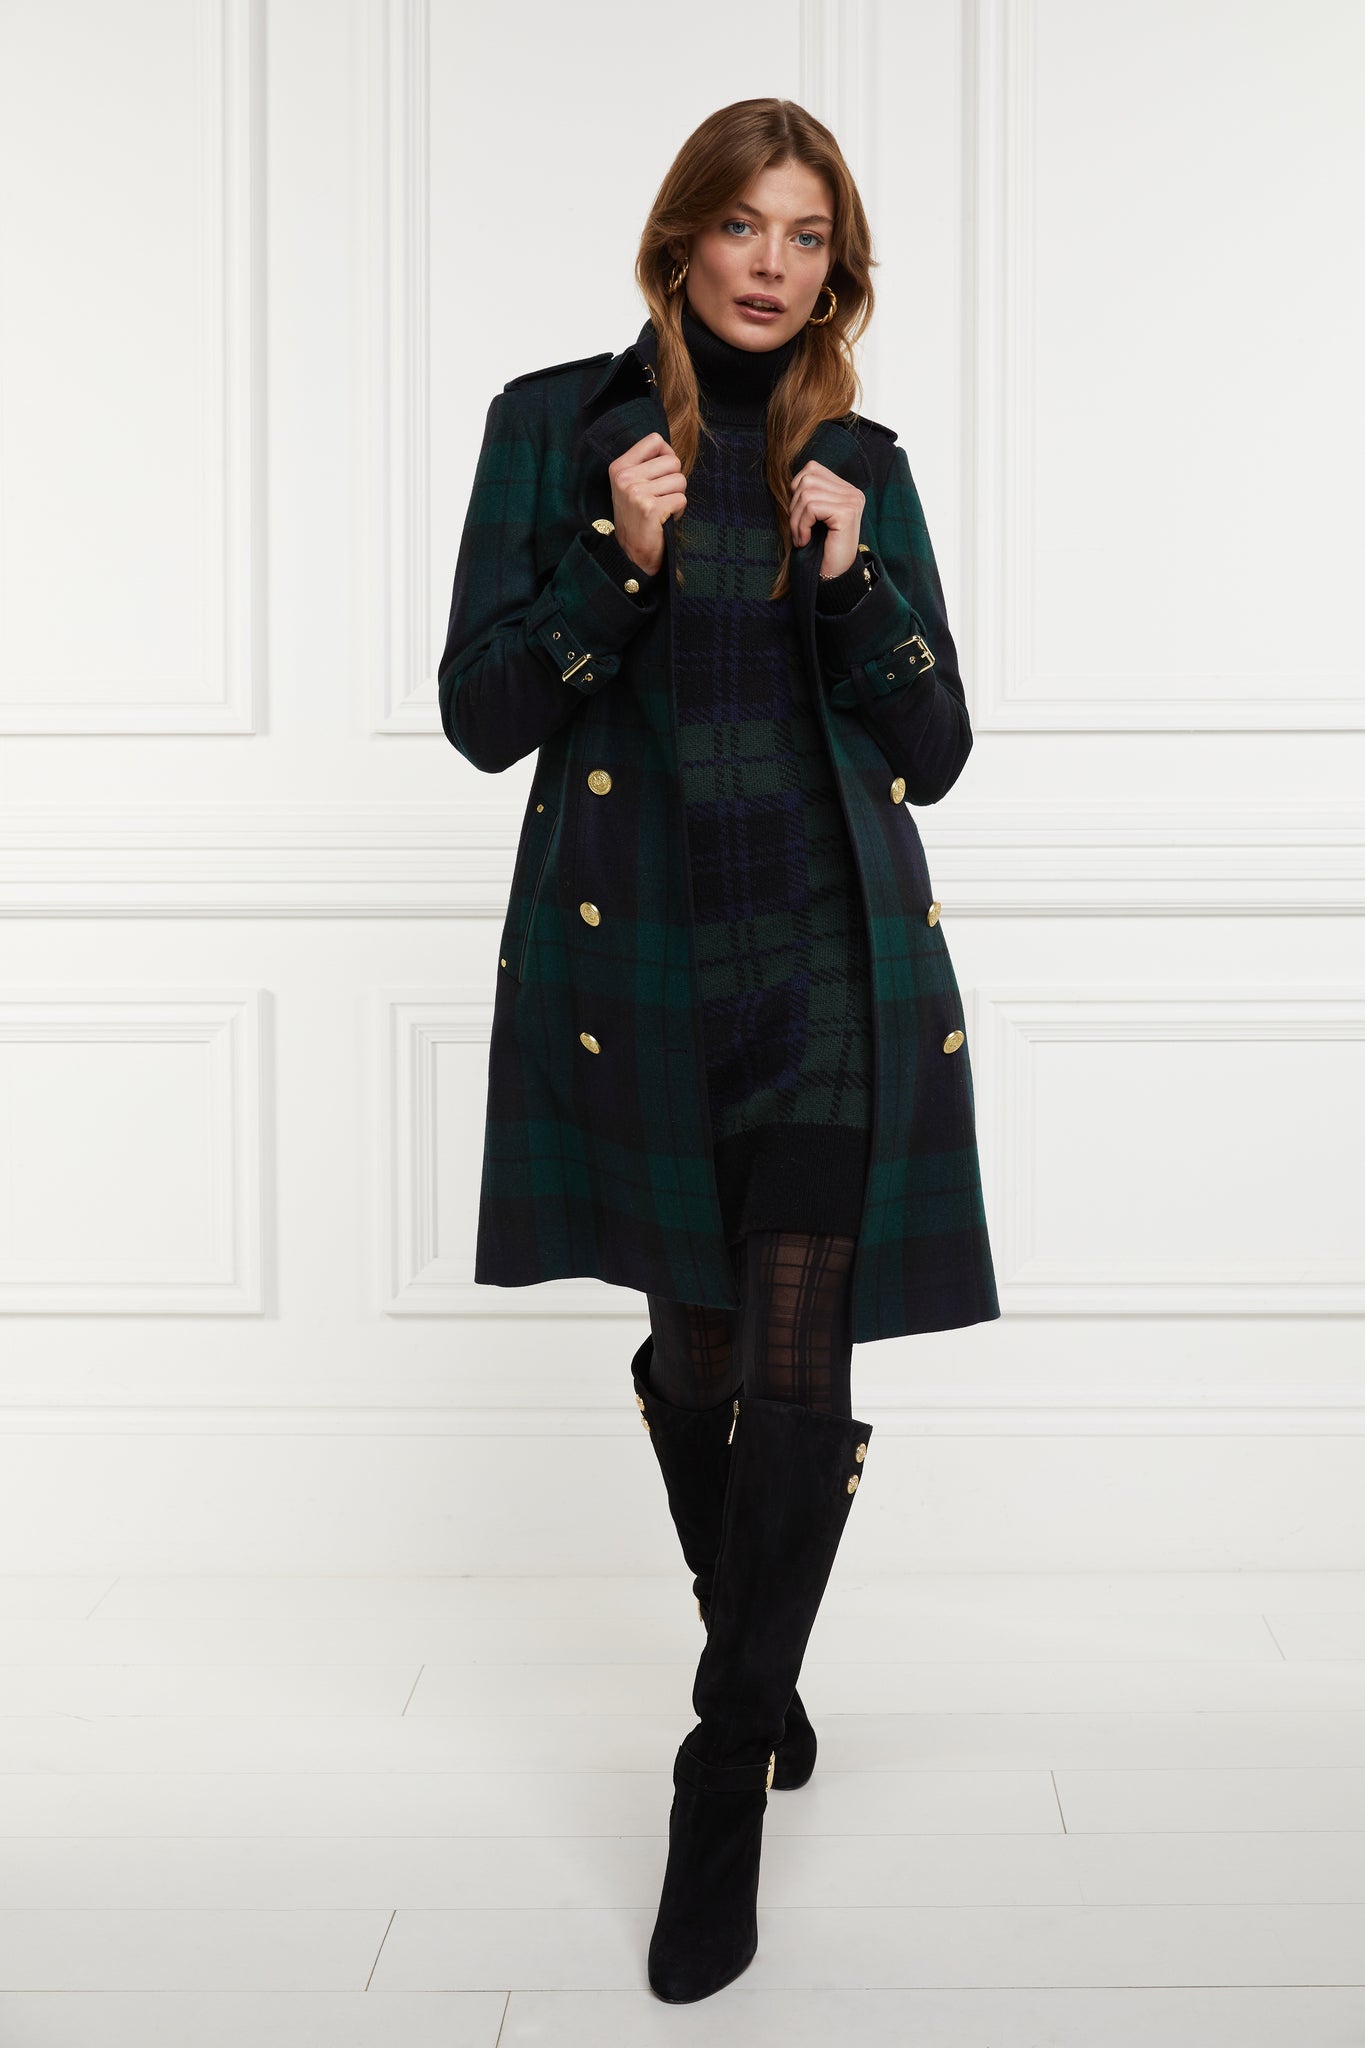 womens green navy and black blackwatch roll neck jumper dress with contrast black cuffs and ribbed hem with gold button detail on the cuffs and shoulder under blackwatch mid length trench coat